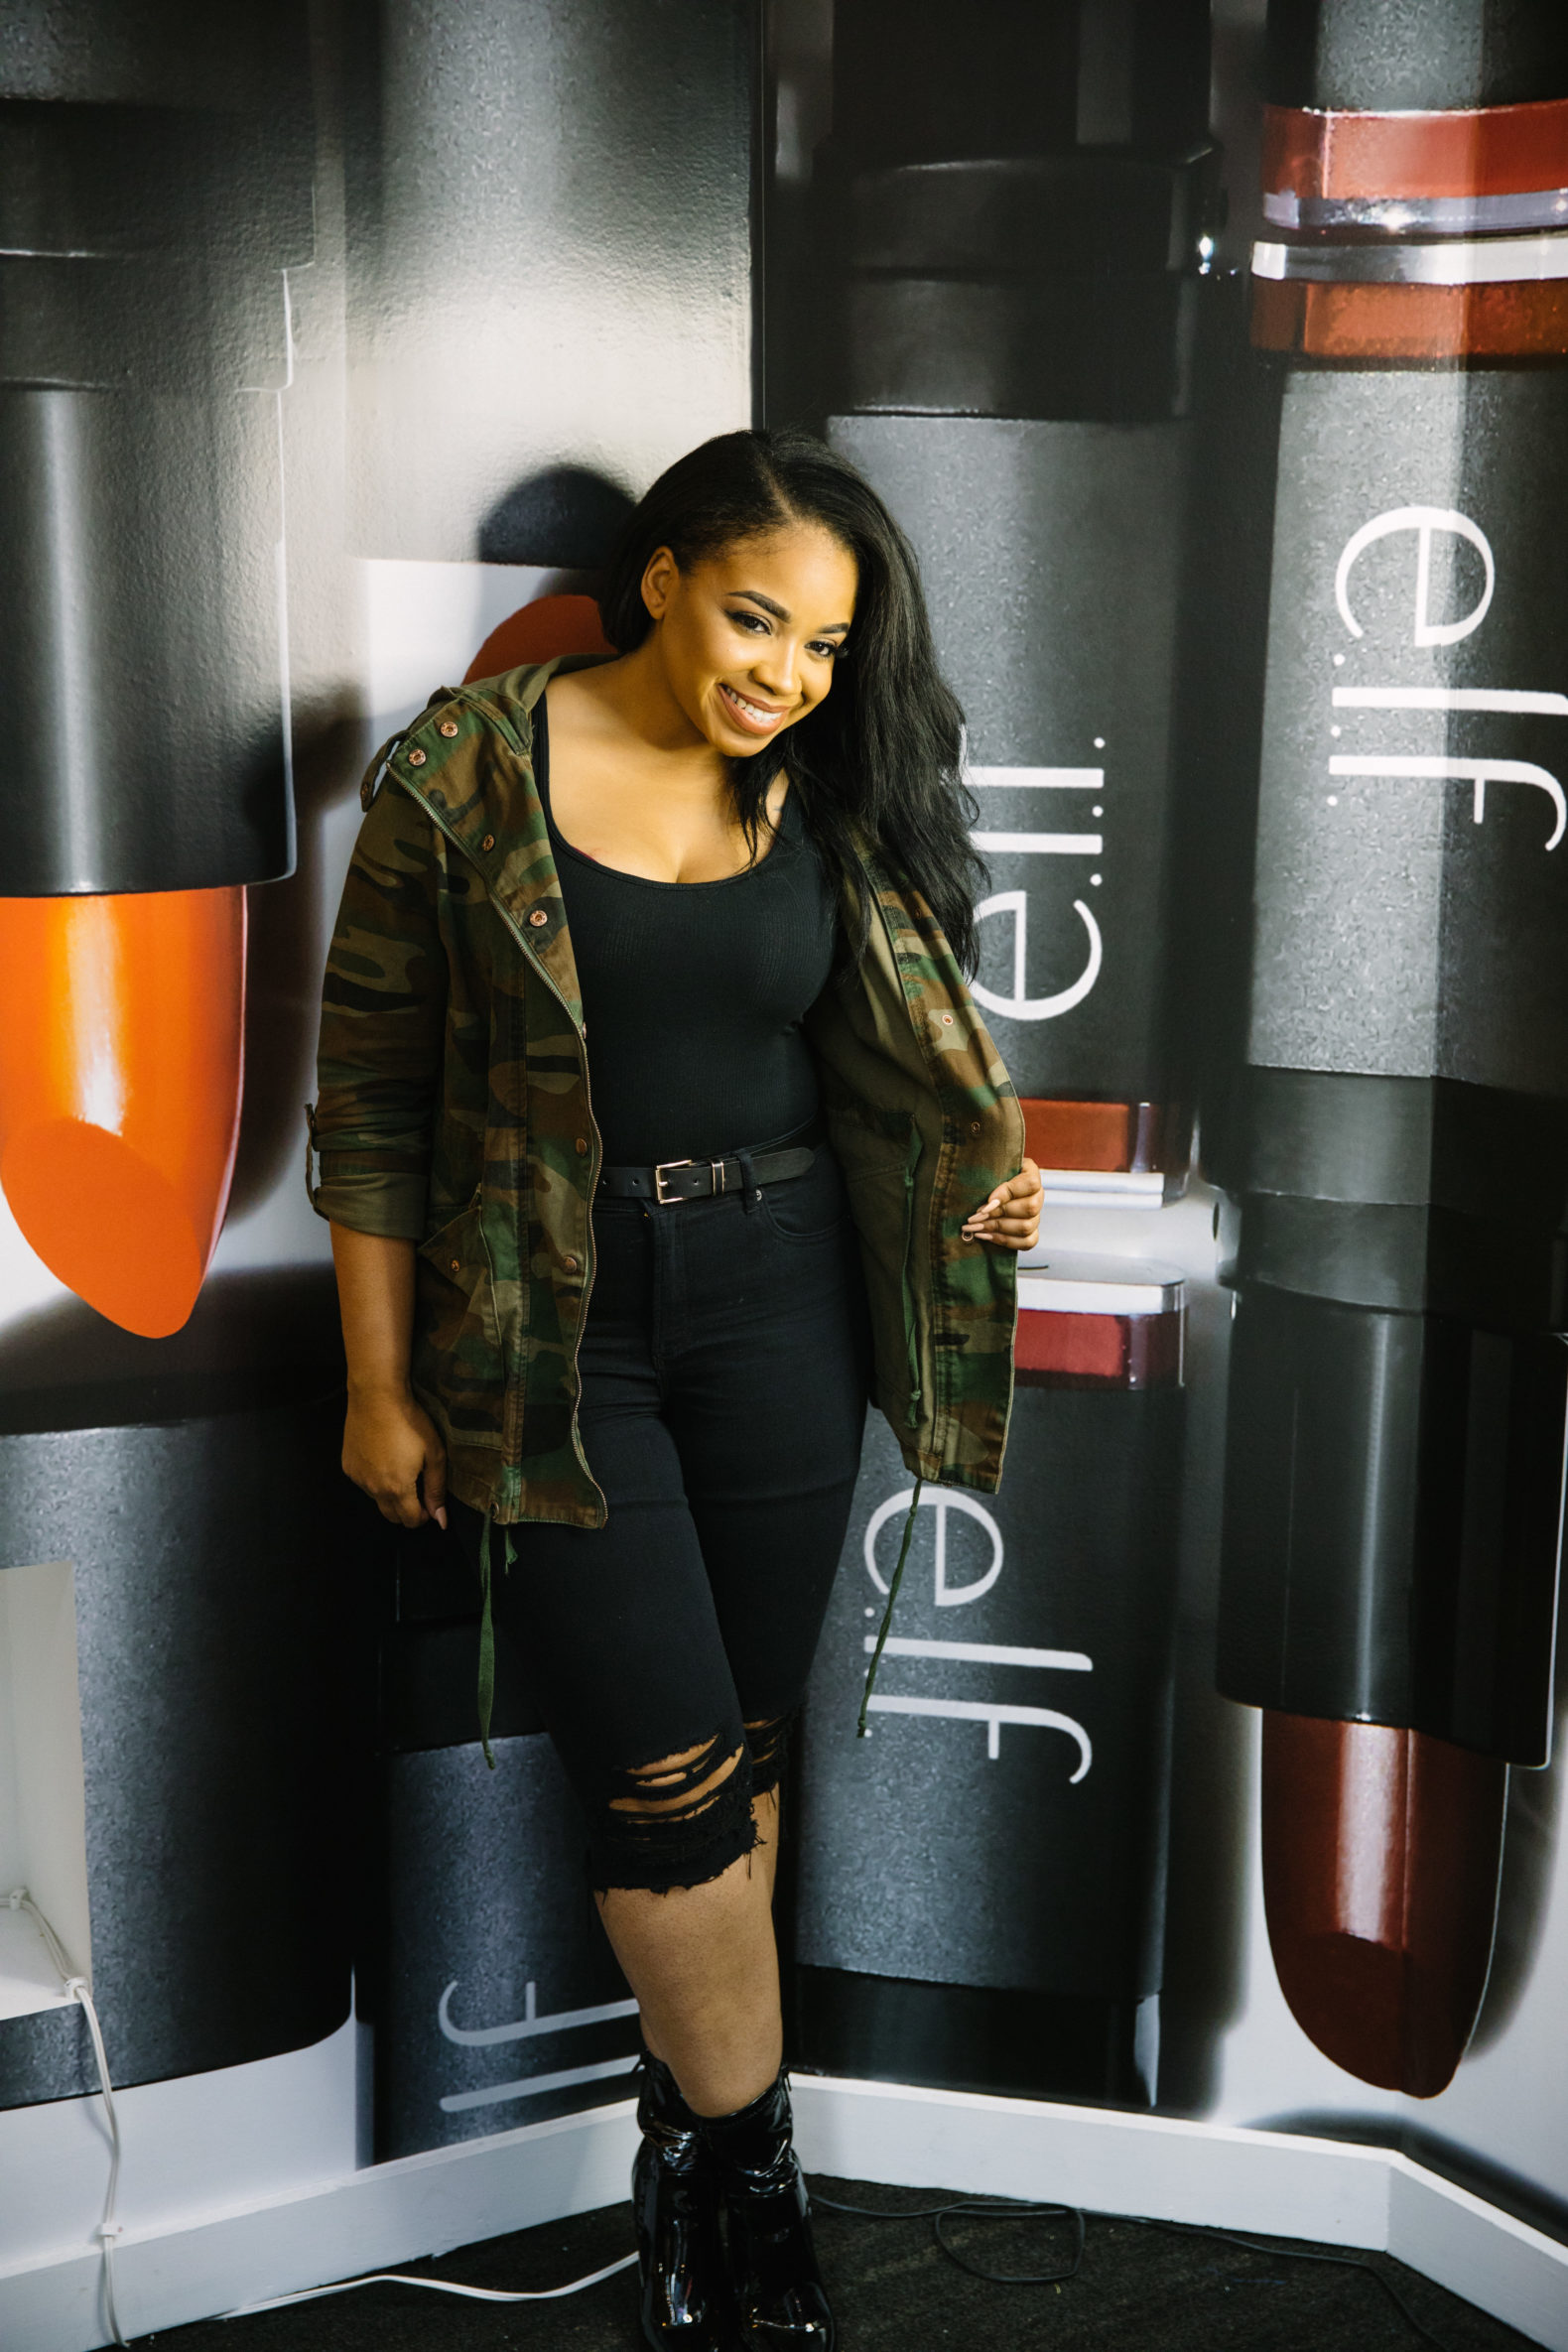 A female presenting individual poses in front of a printed background of giant e.l.f lipsticks. She is wearing black denim jeans, boots, a black top and a camo jacket. 